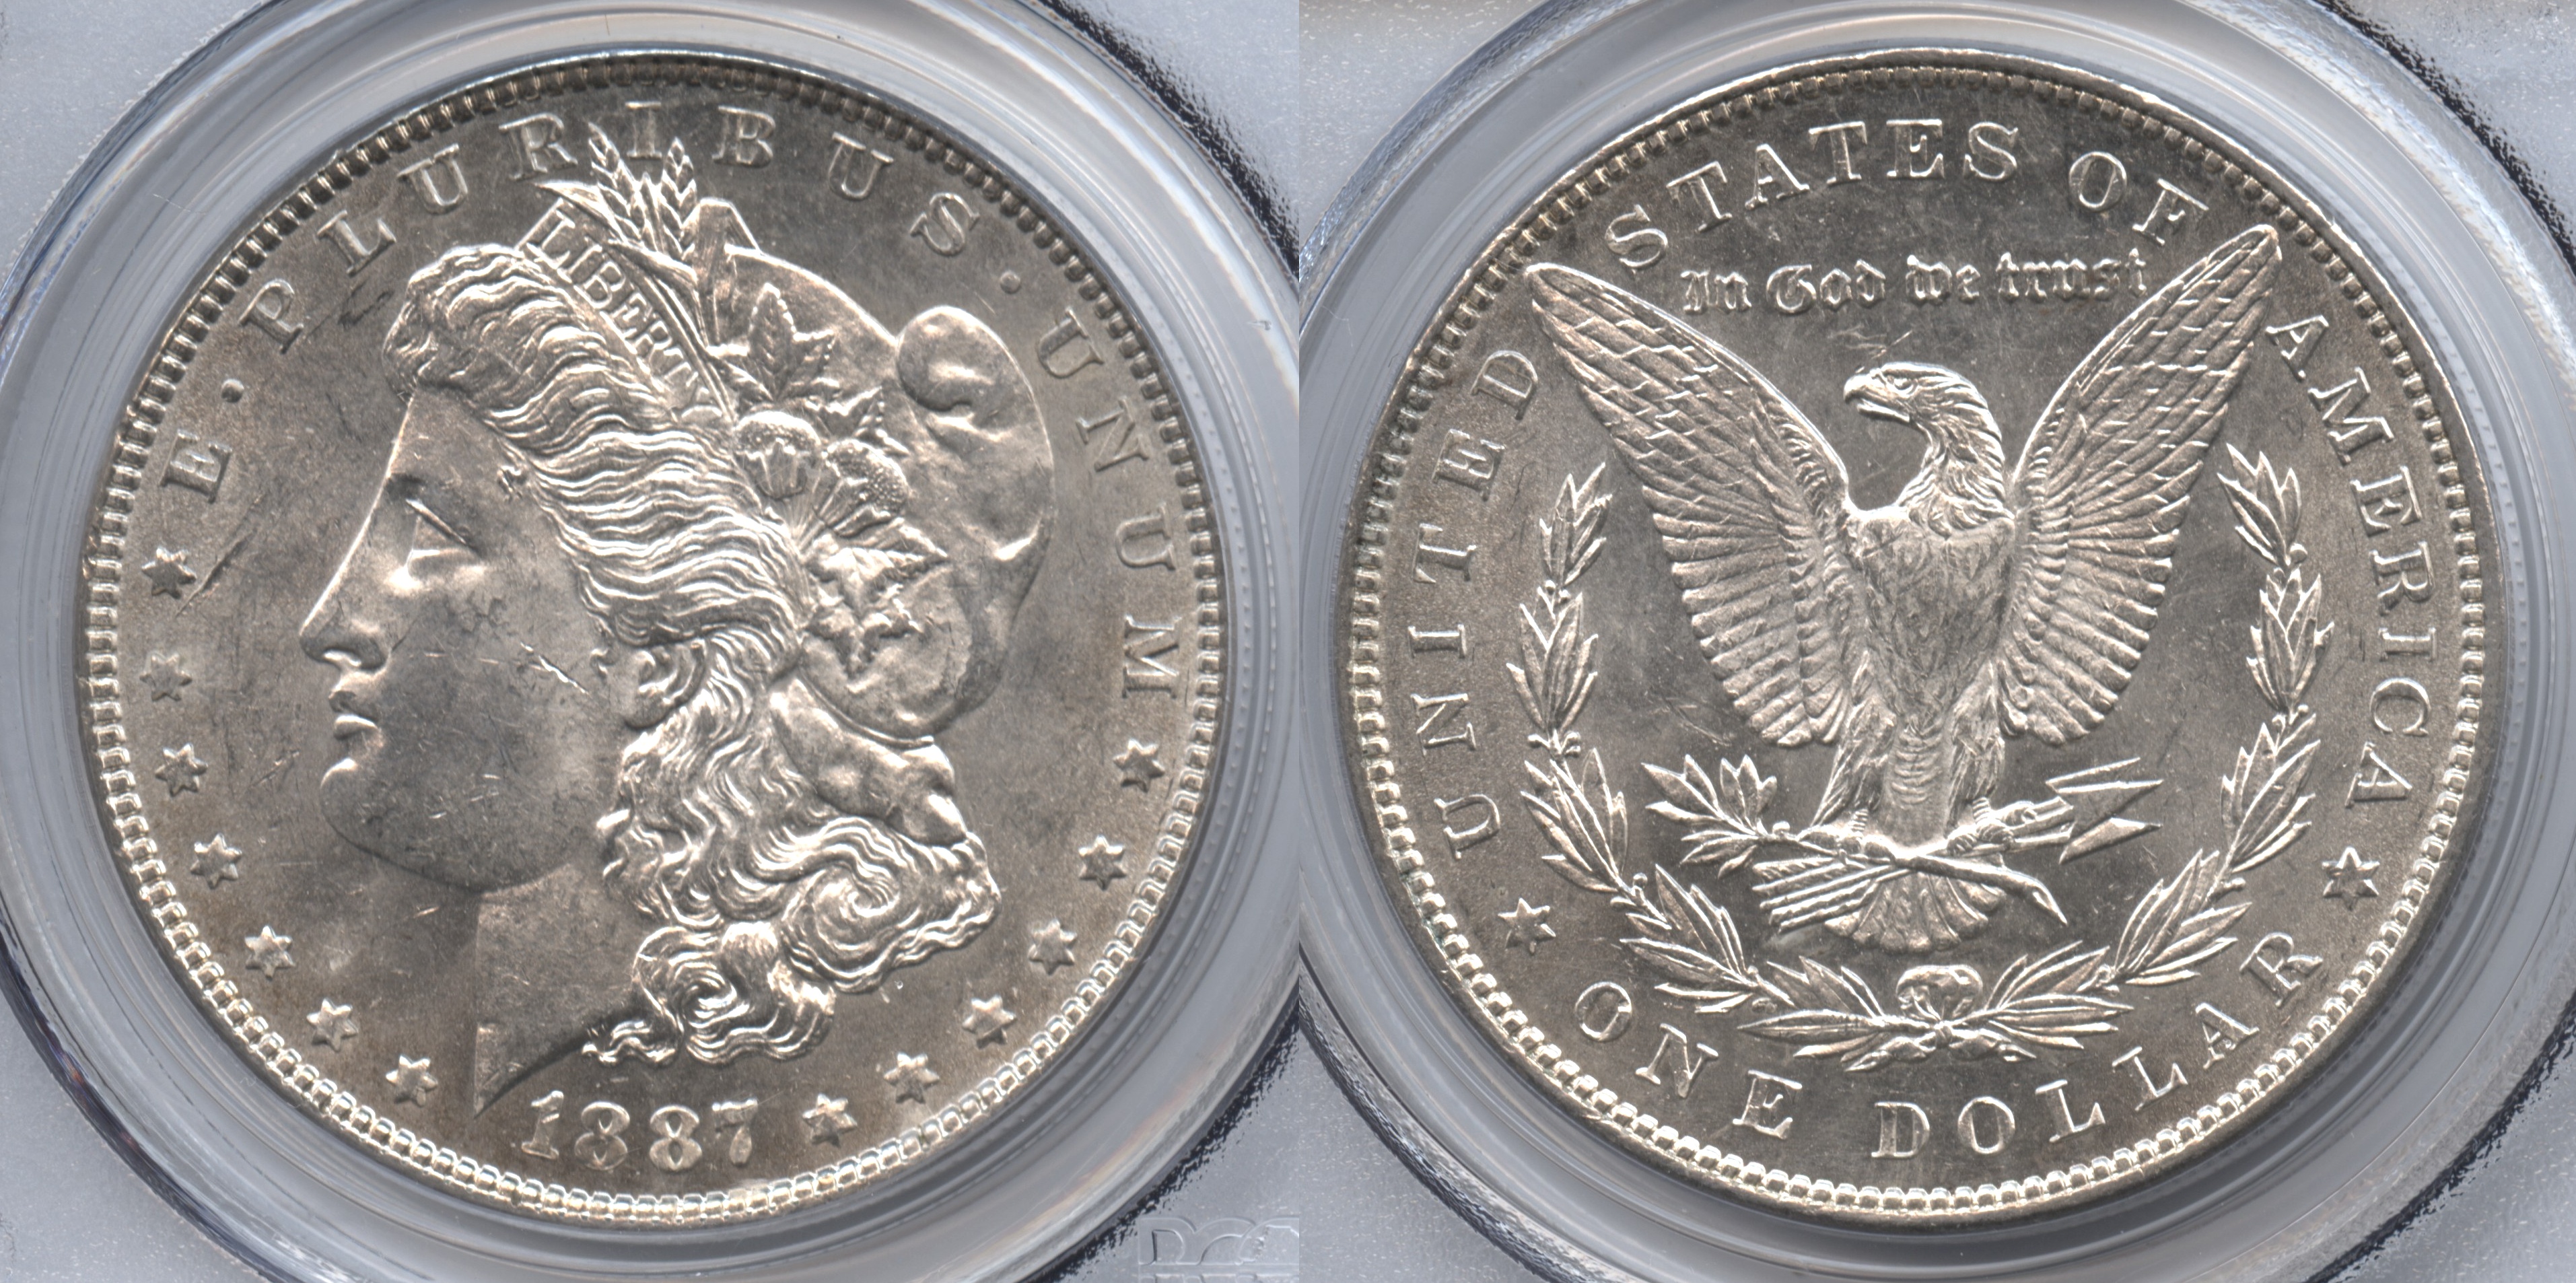 1887 Morgan Silver Dollar PCGS MS-63 #a VAM-13, Doubled Stars, 7 in Denticles, Doubled Die Reverse